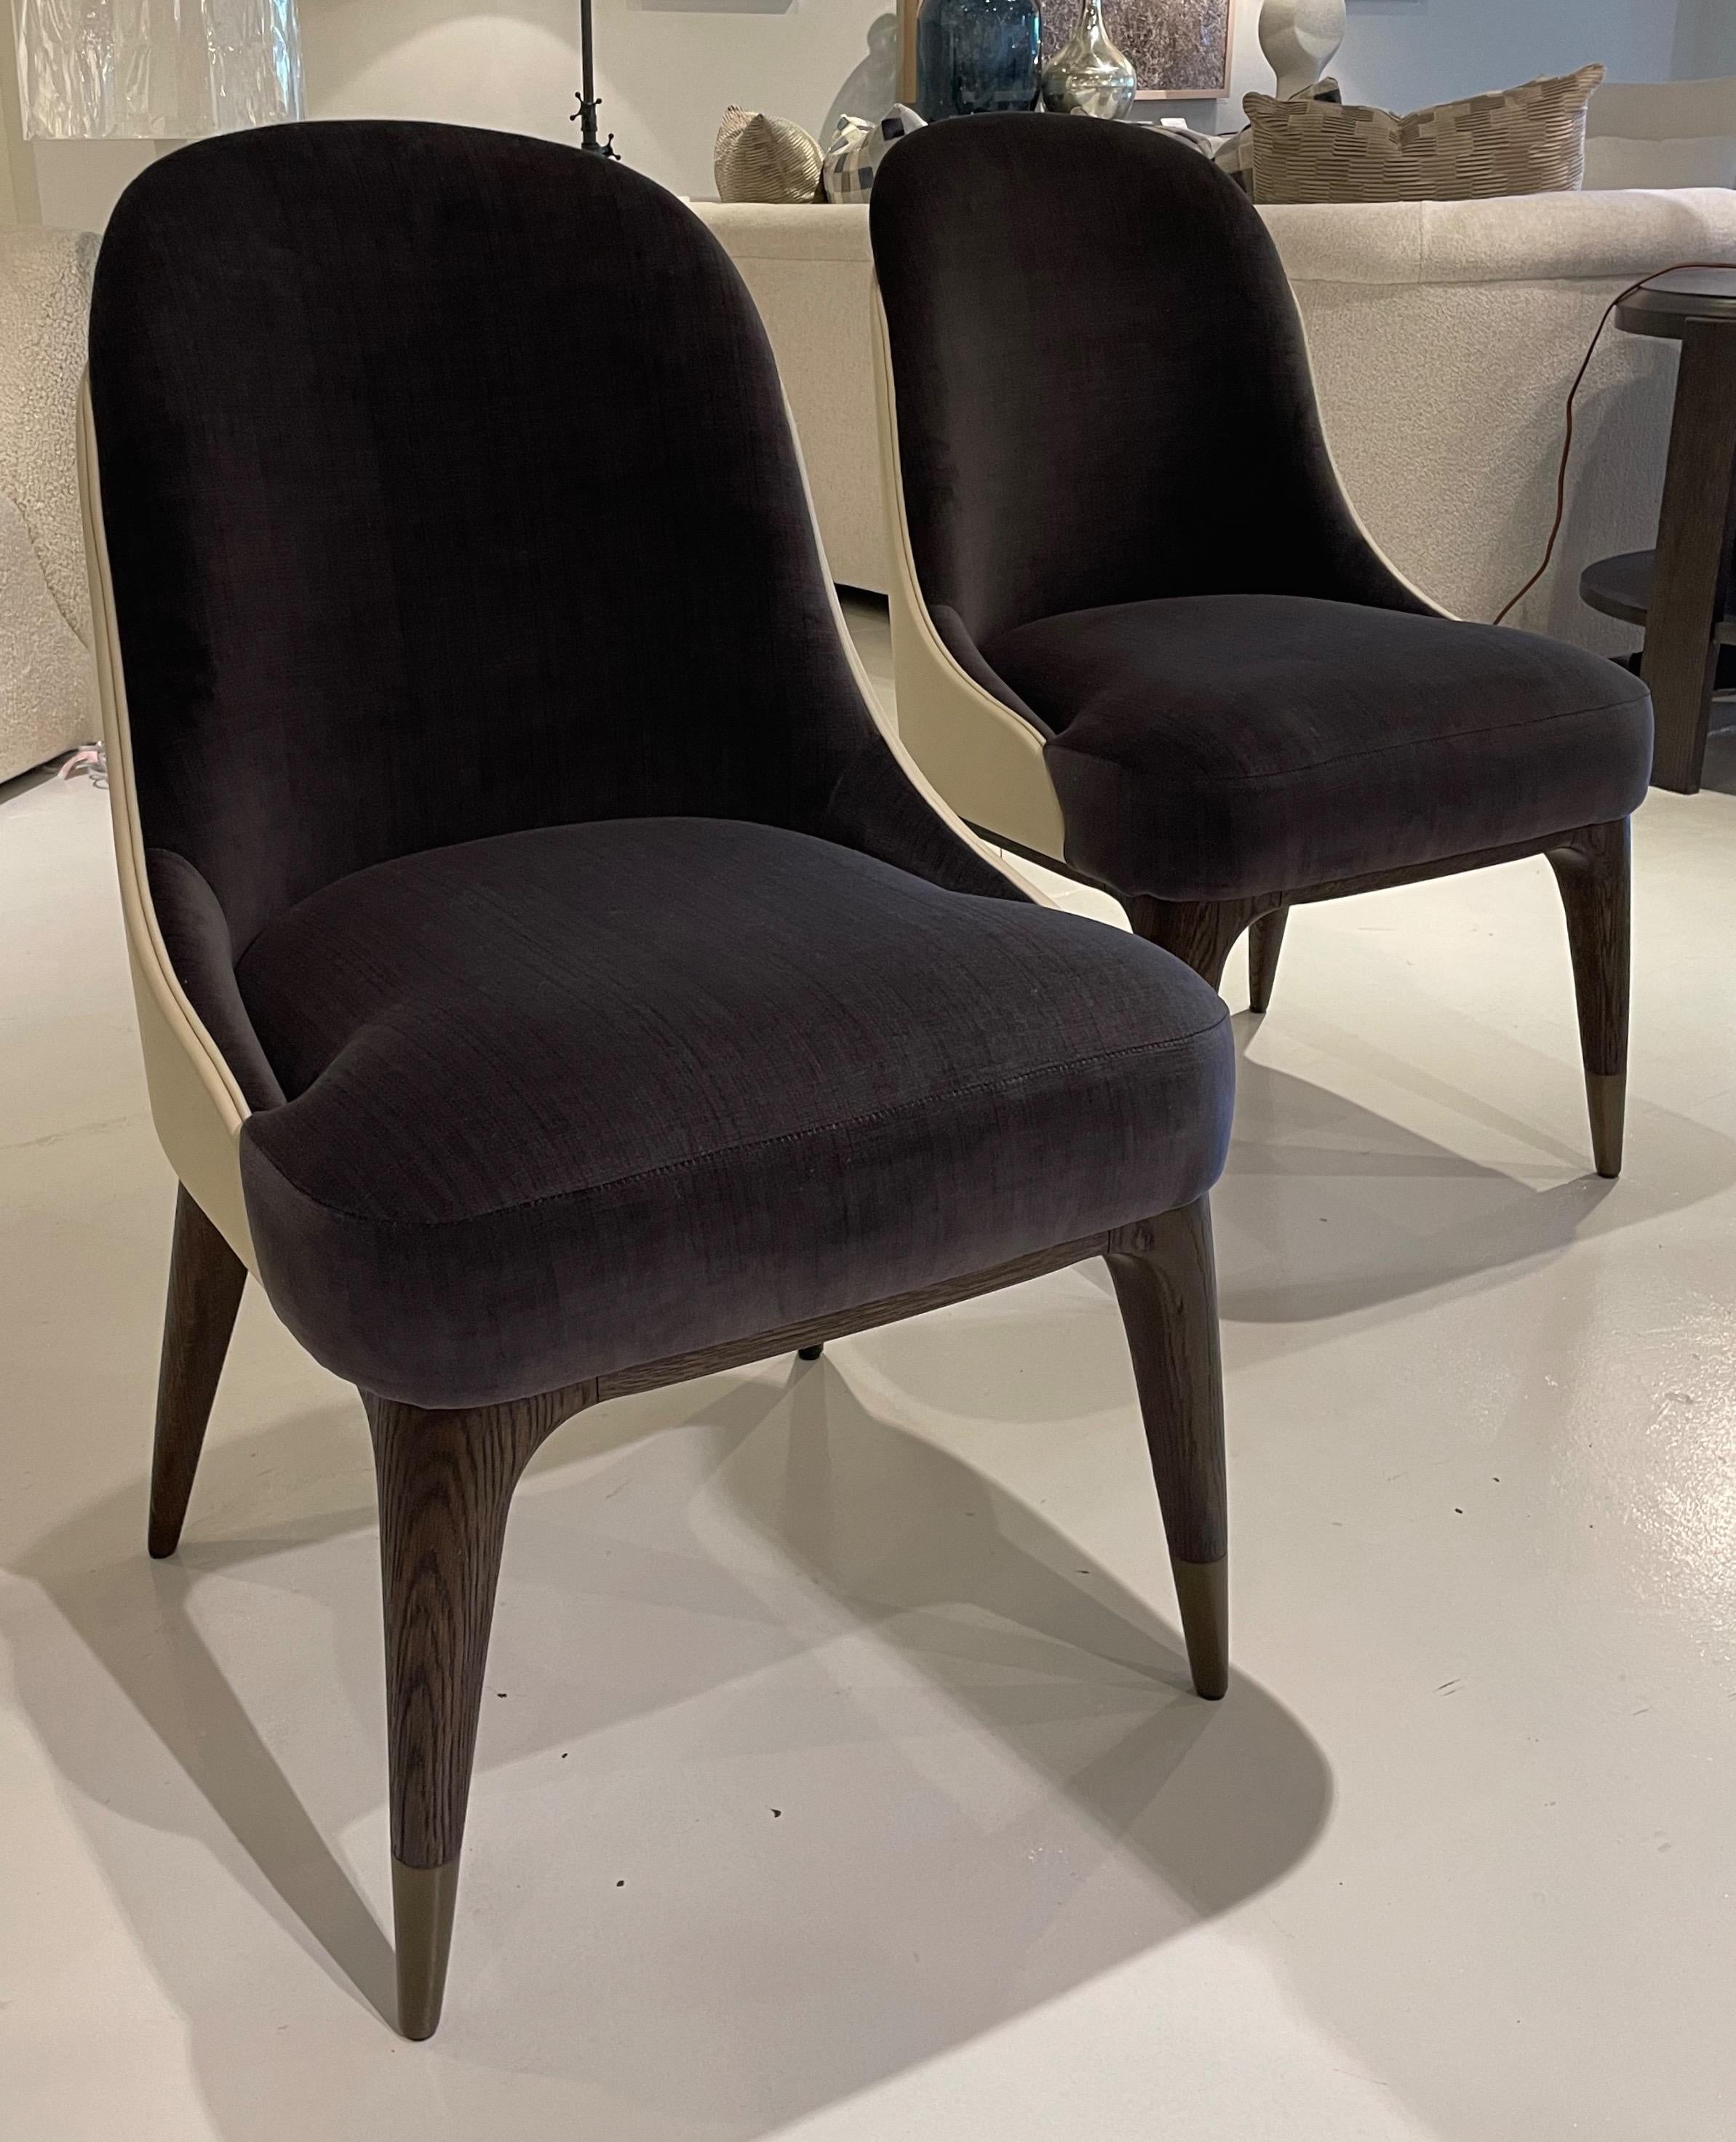 Showroom new - pair of Theodore Alexander covet dining chair II designed by Steve Leung. Ivory leather wrapped tailored back. Seat and in-back are covered in a luxurious grey velvet. Solid brushed beech legs in a Cigar Club finish with bronze